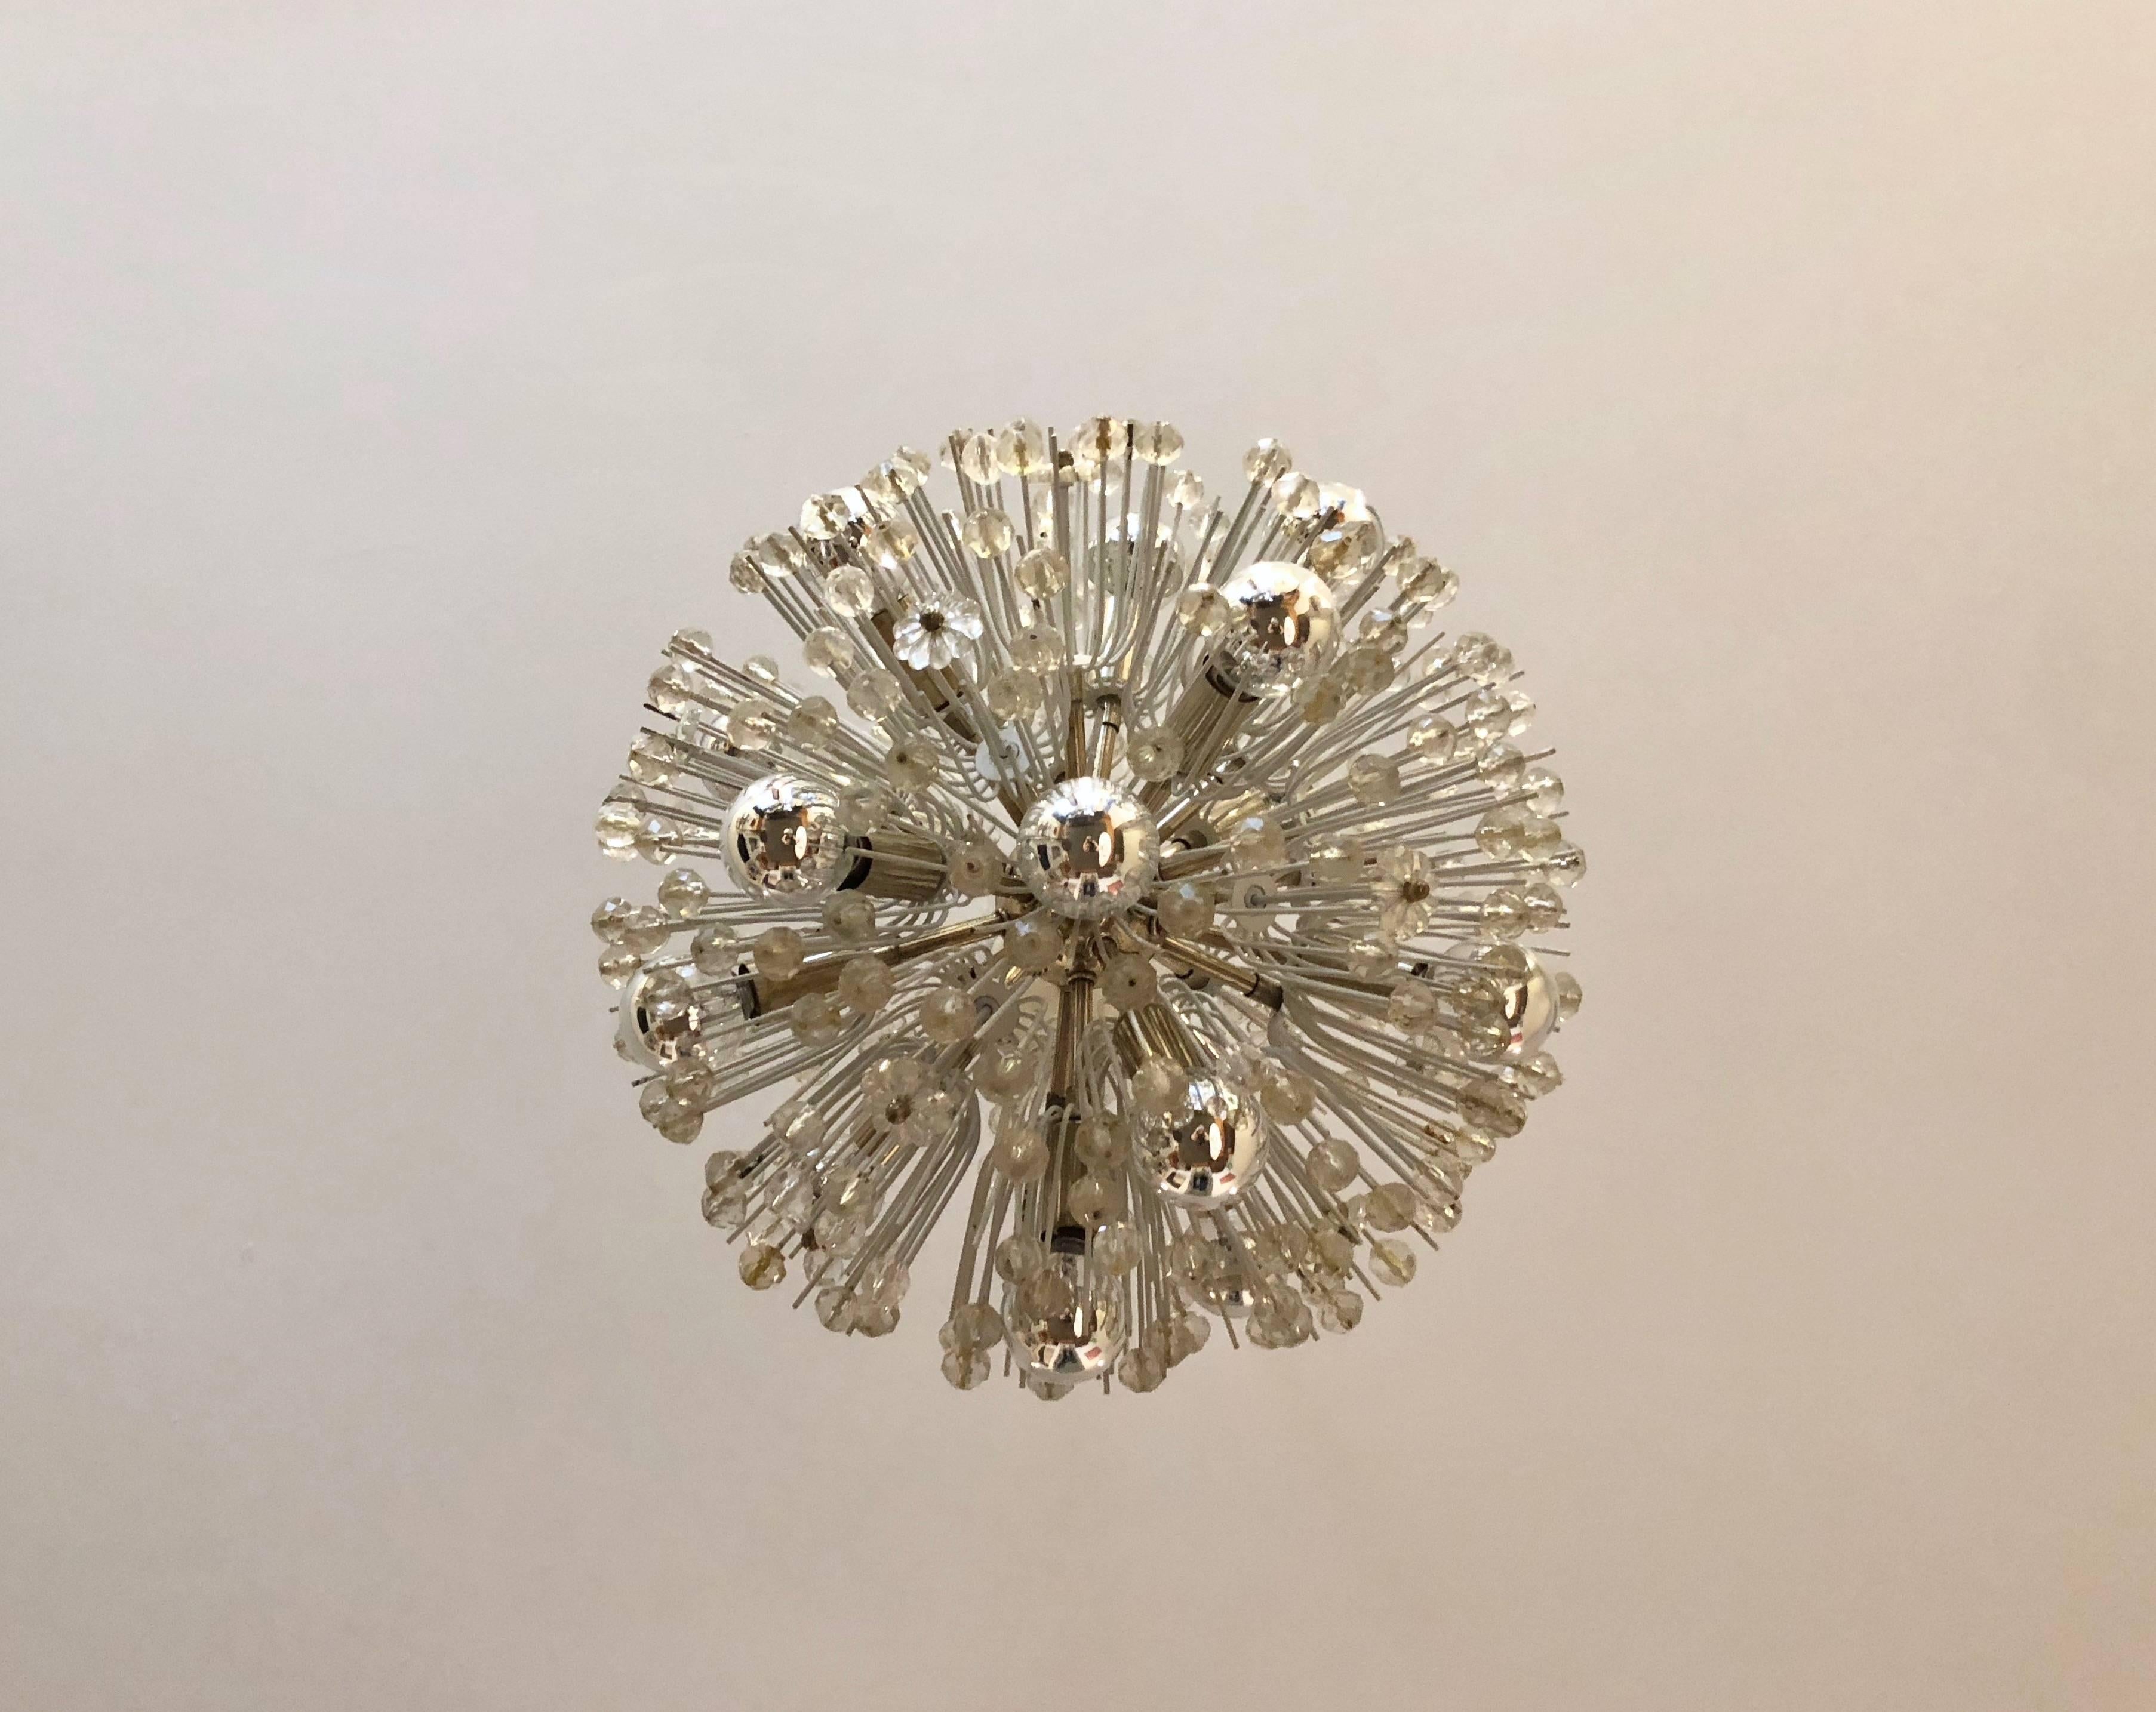 Pusteblume Ceiling Fixture by Emil Stejnar for Rupert Nikoll, Austria circa 1965 In Excellent Condition For Sale In Jersey City, NJ